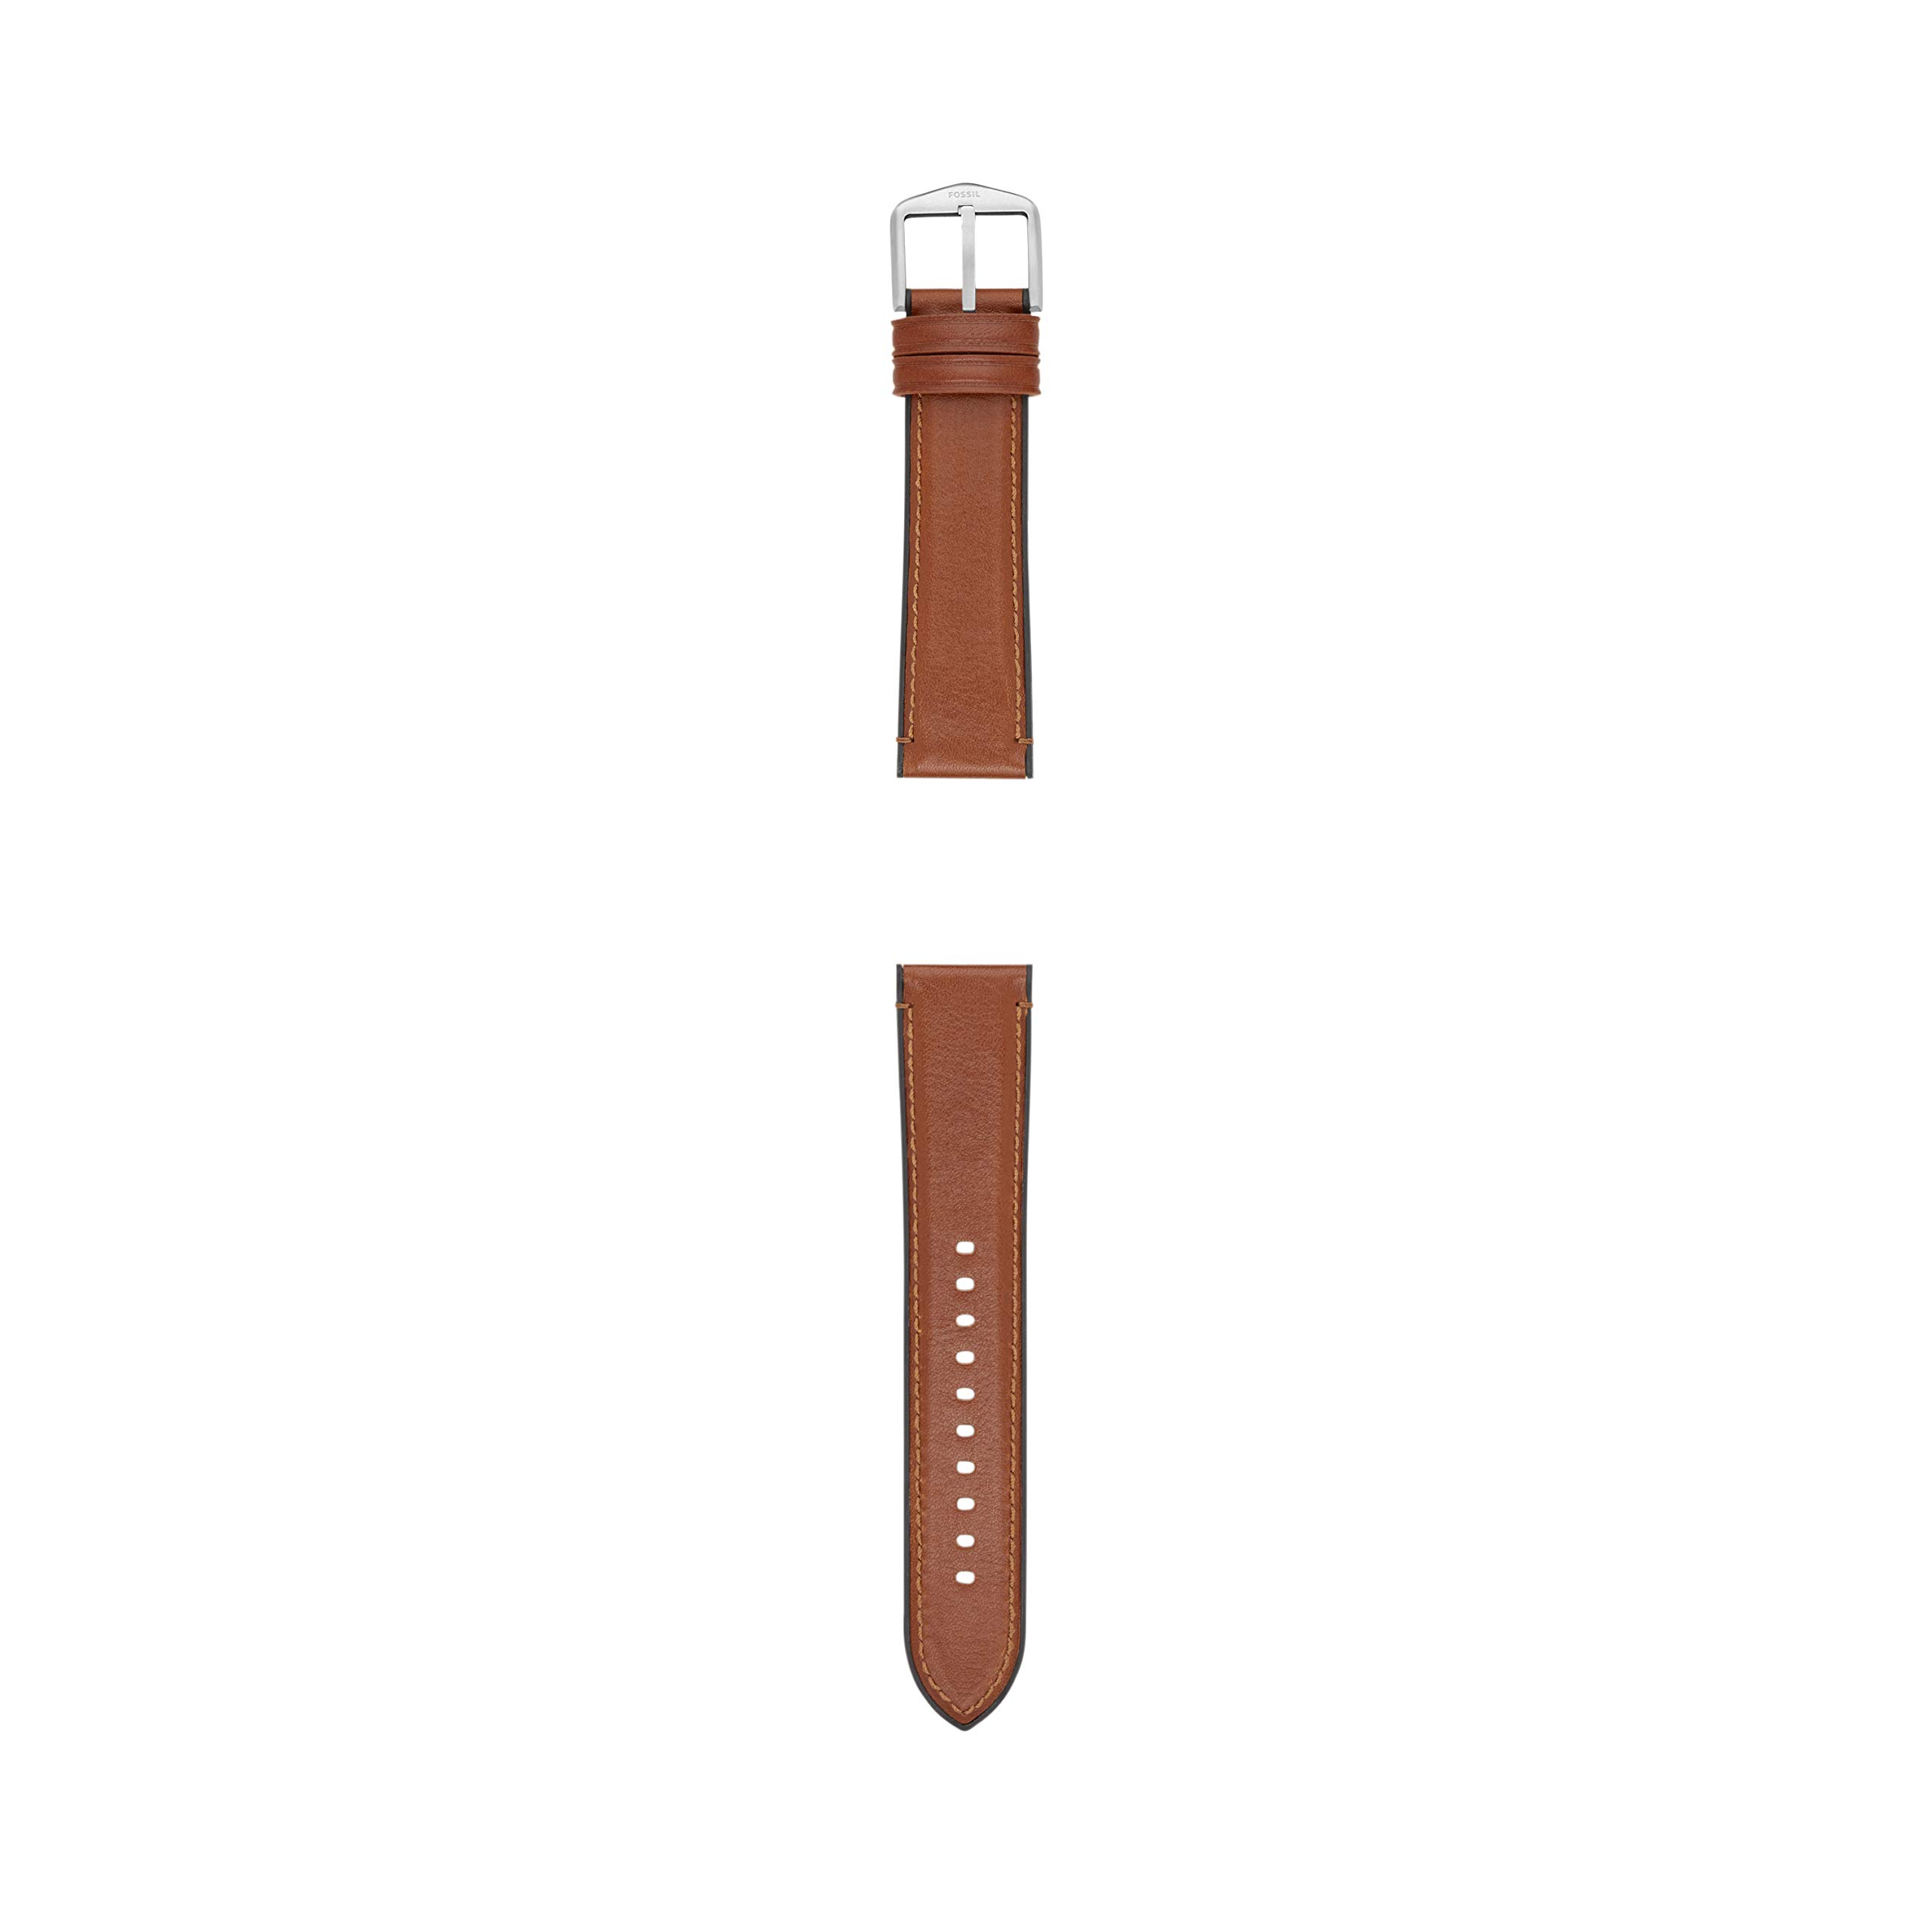 Fossil All-Gender 22mm Leather/Silicone Interchangeable Watch Band Strap, Color: Light Brown (Model: S221300)